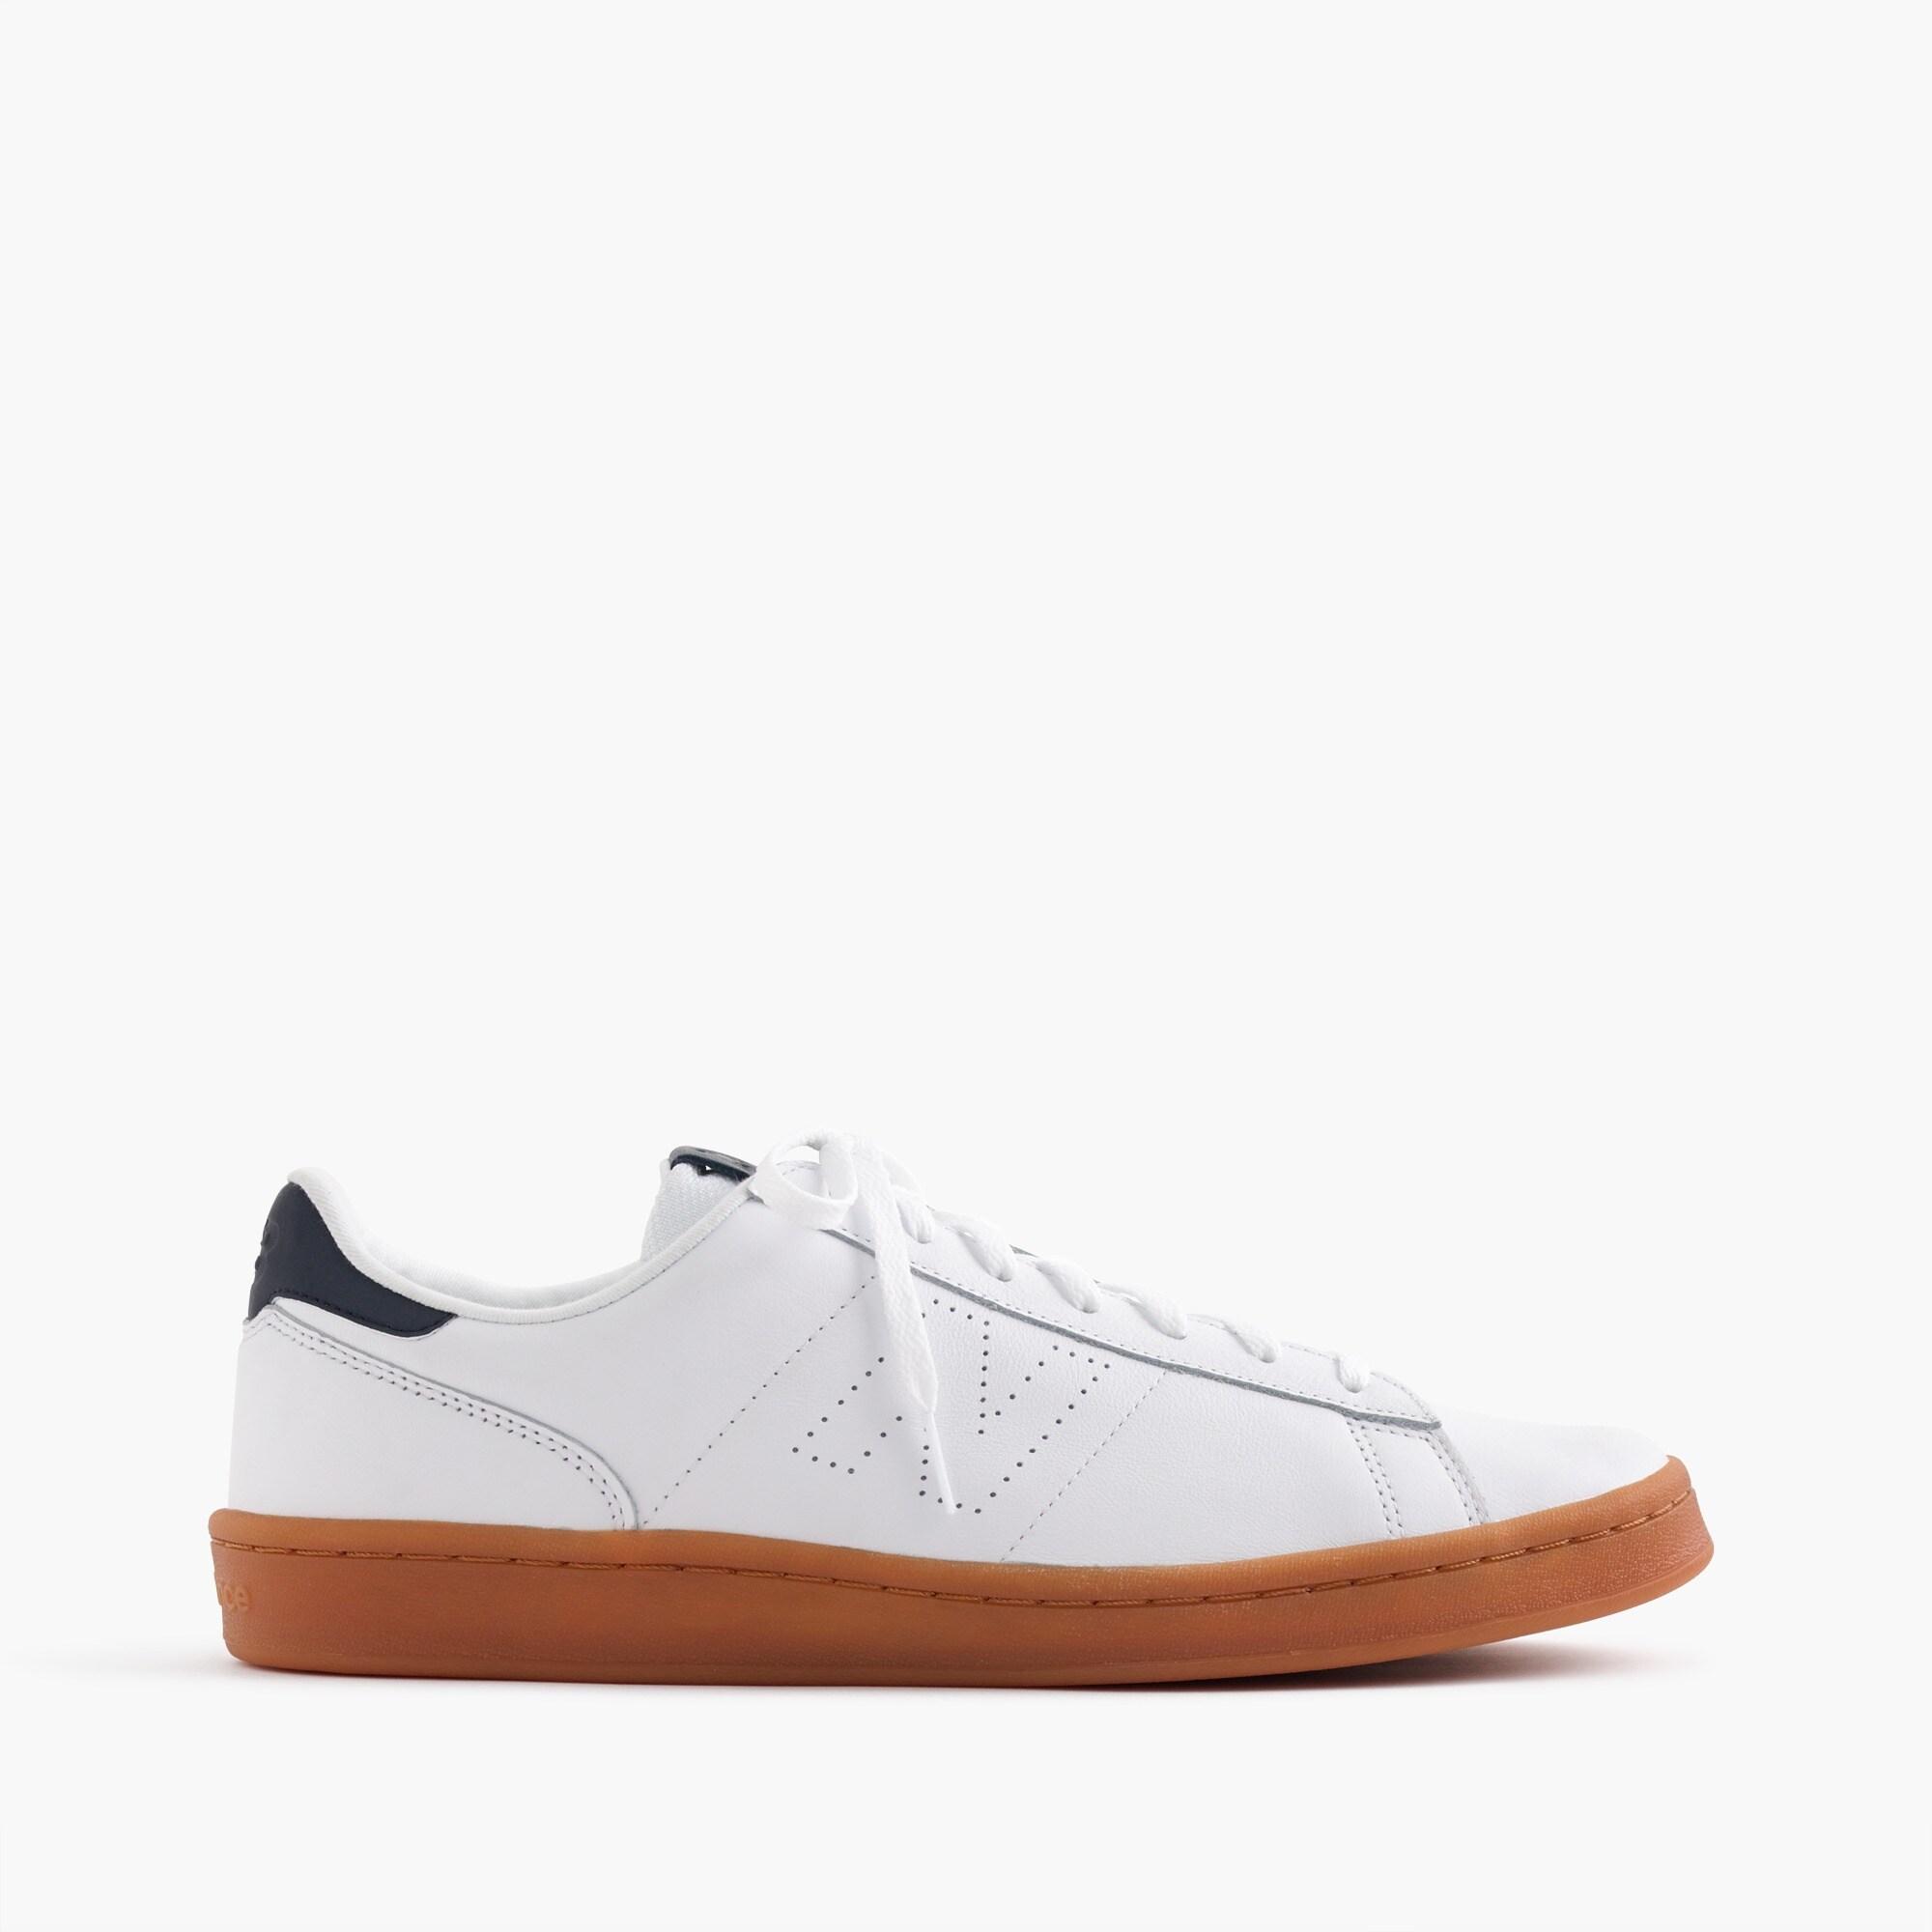 New Balance ® For J.crew 791 Leather Sneakers in White for Men - Lyst